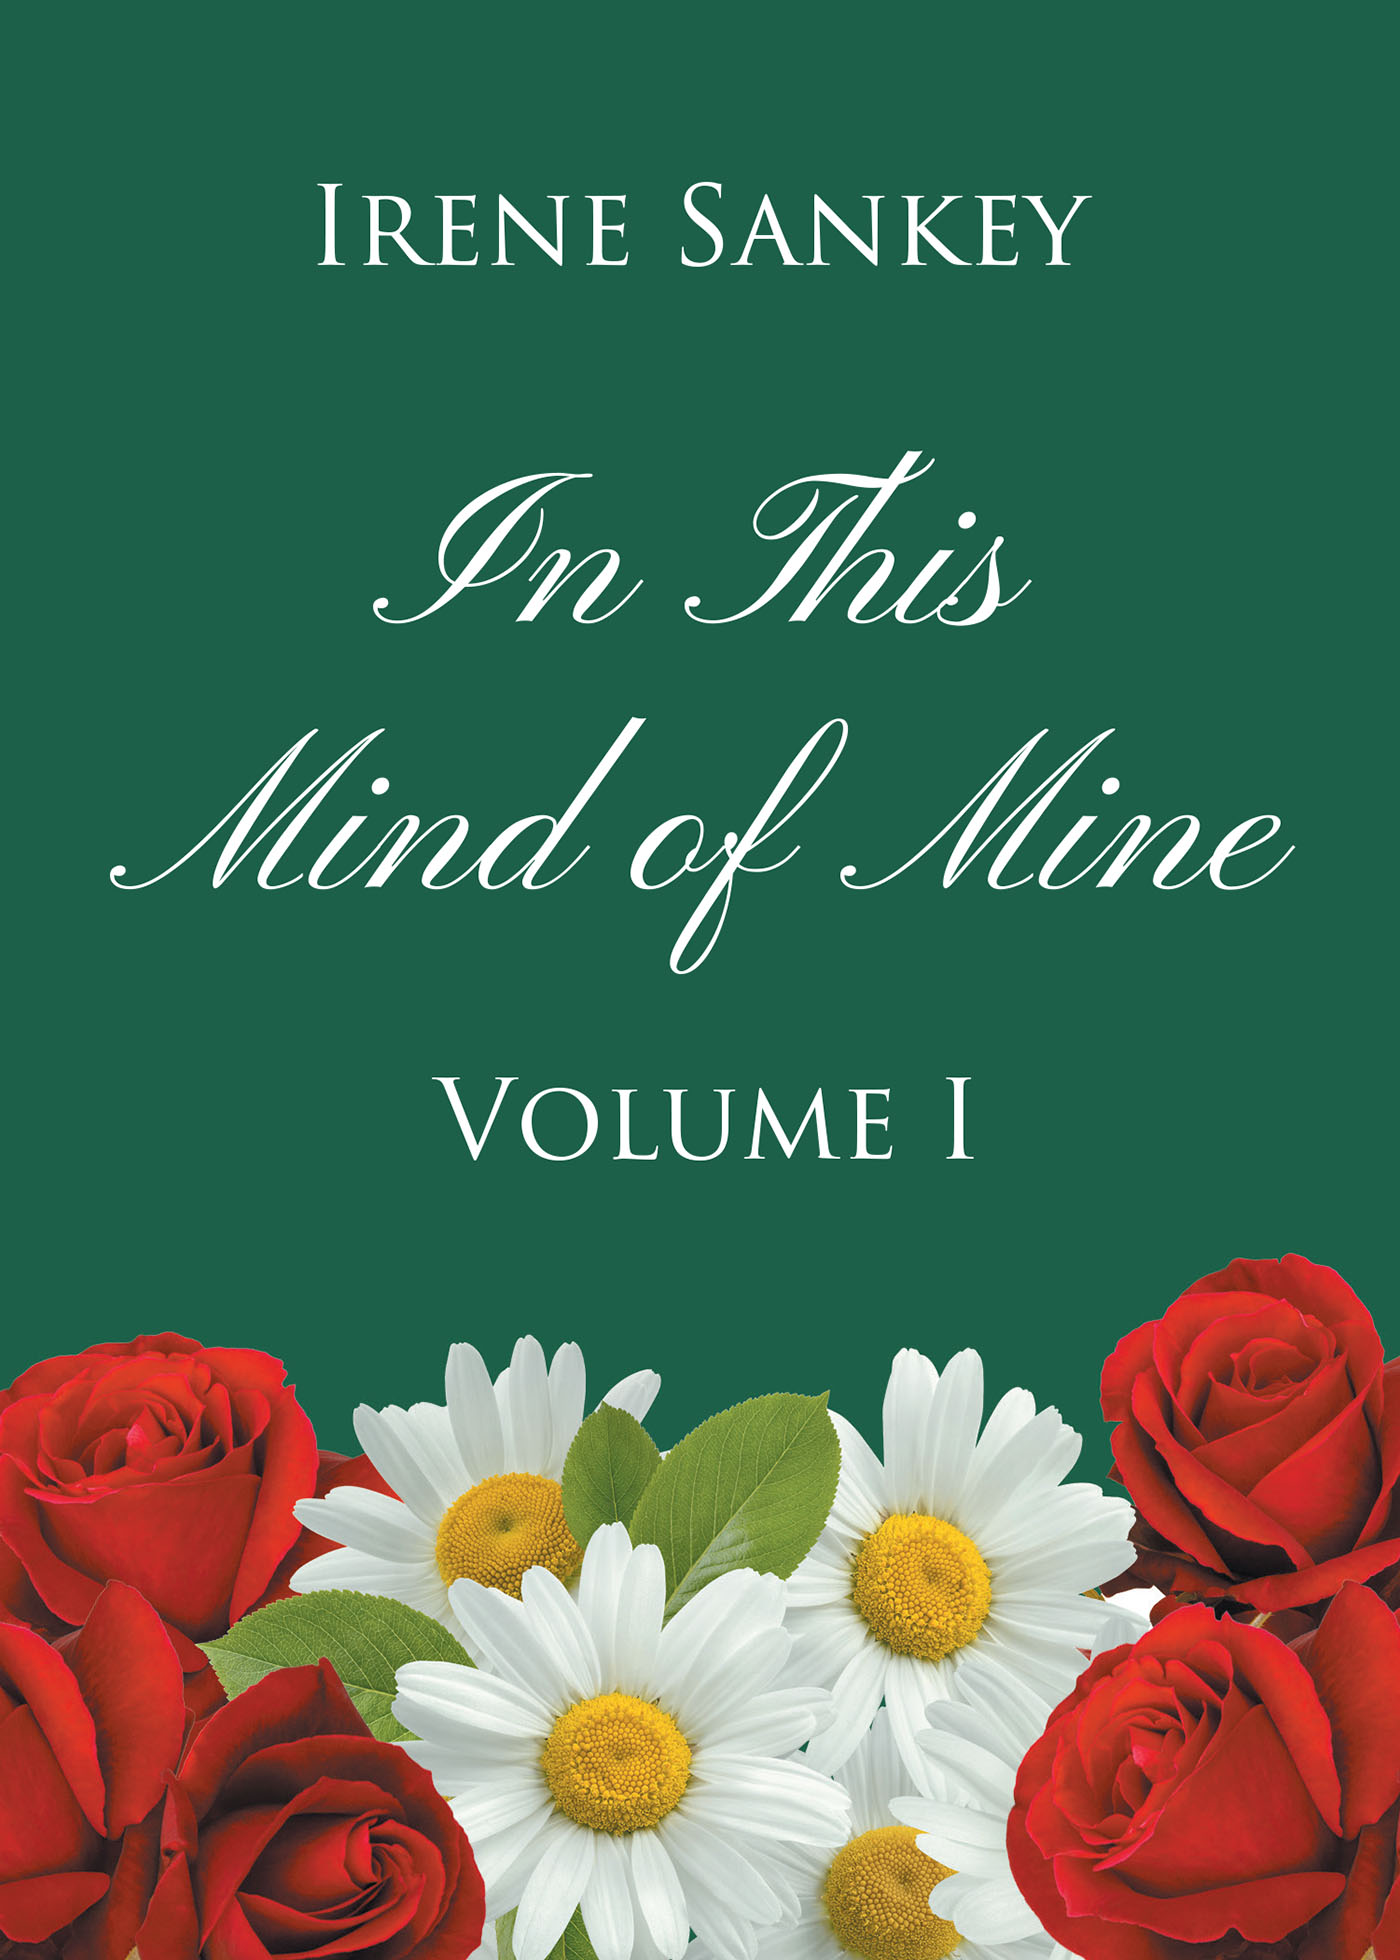 Author Irene Sankey’s New Book, “In this Mind of Mine: Volume I,” is an Emotional Series of Poems & Stories from the Author's Past That Reflect Upon Her Experiences